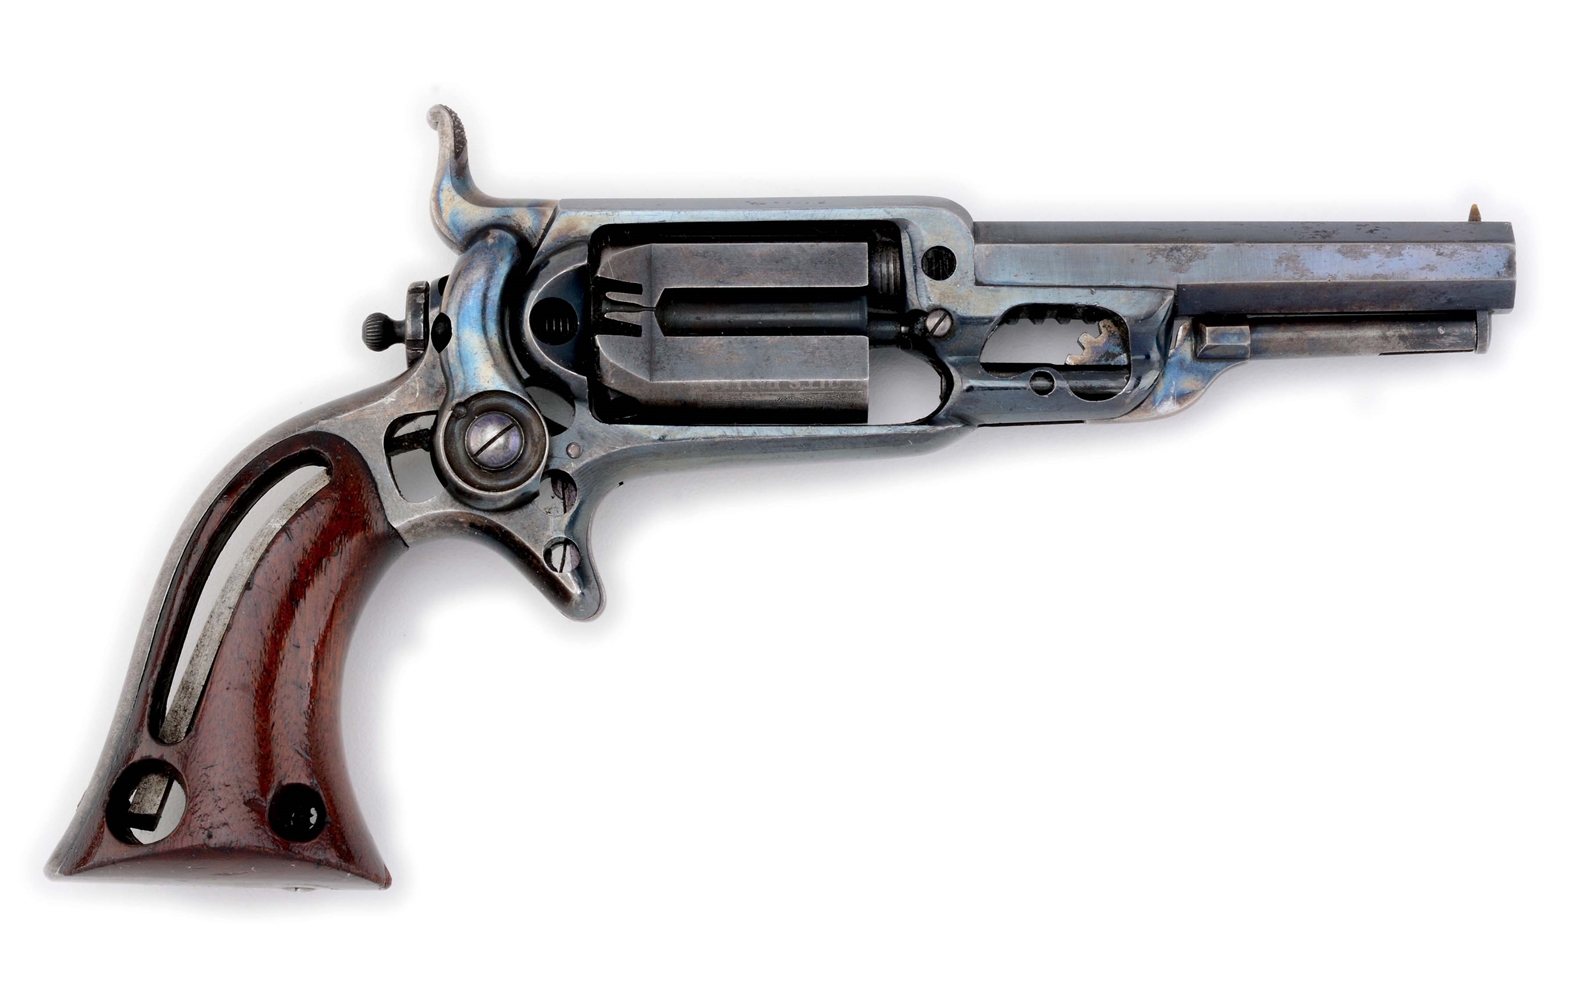 (A) EXTREMELY RARE COLT FACTORY CUTAWAY 1855 SIDE HAMMER ROOT REVOLVER (1857).